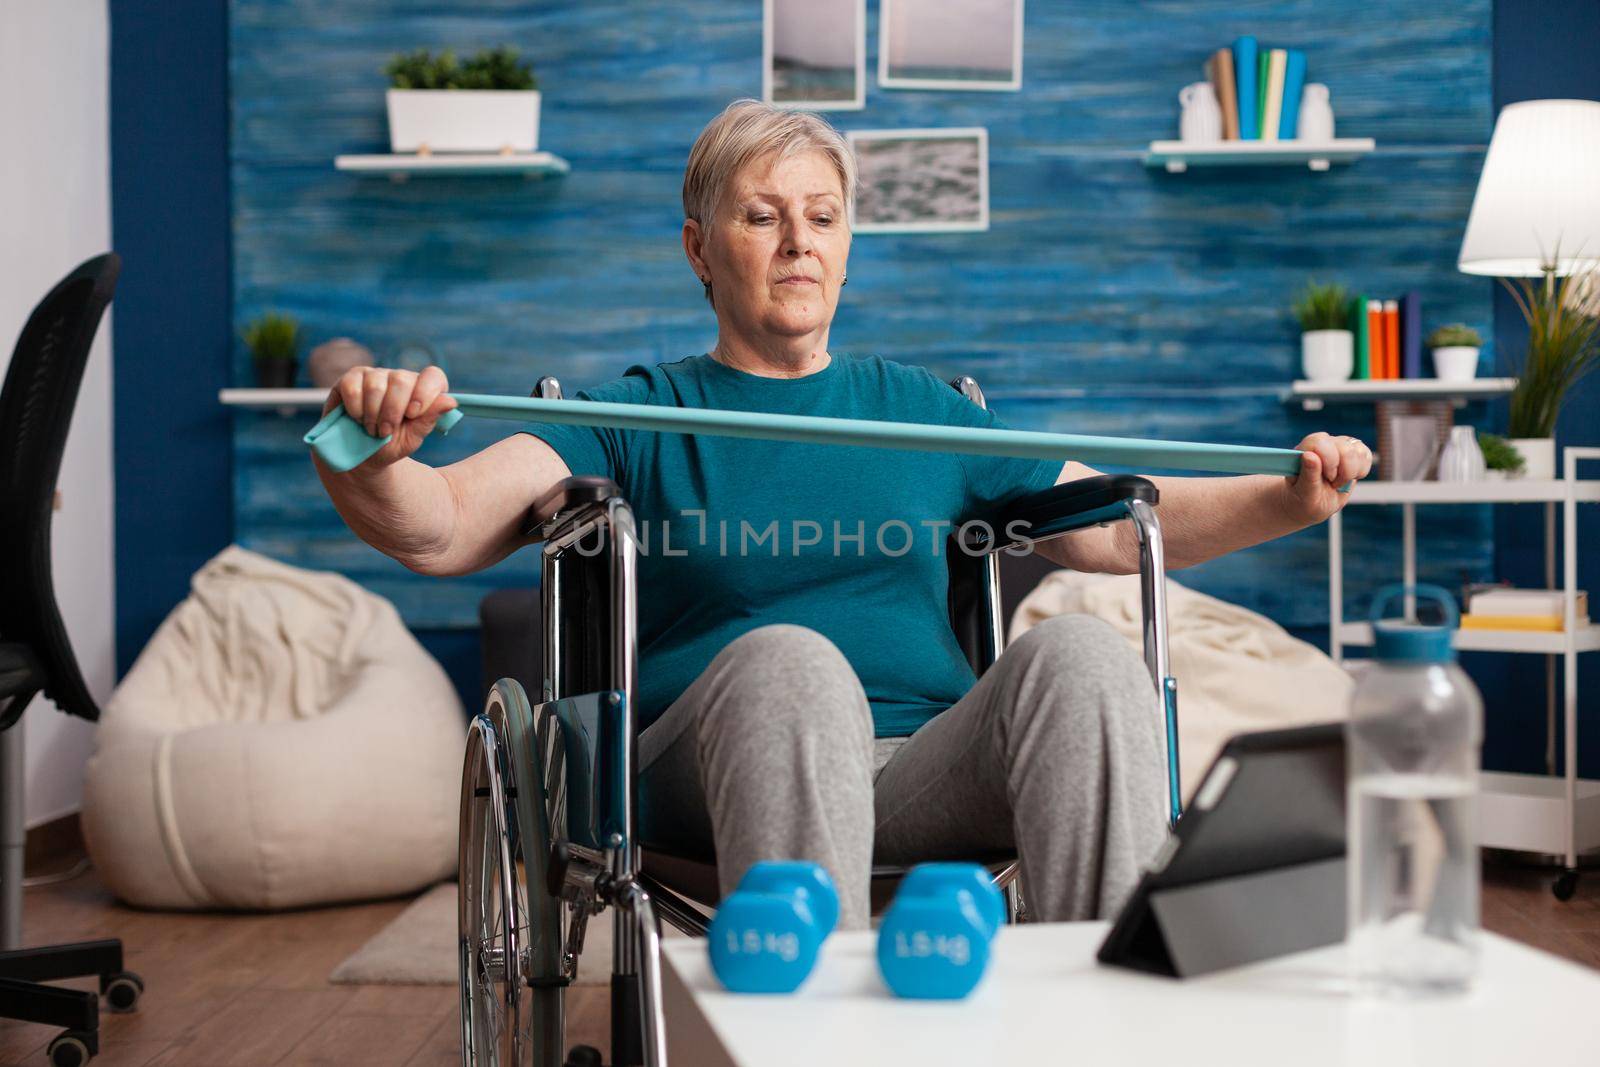 Invalid senior woman exercising arm muscle resistance using elastic band watching fitness video by DCStudio